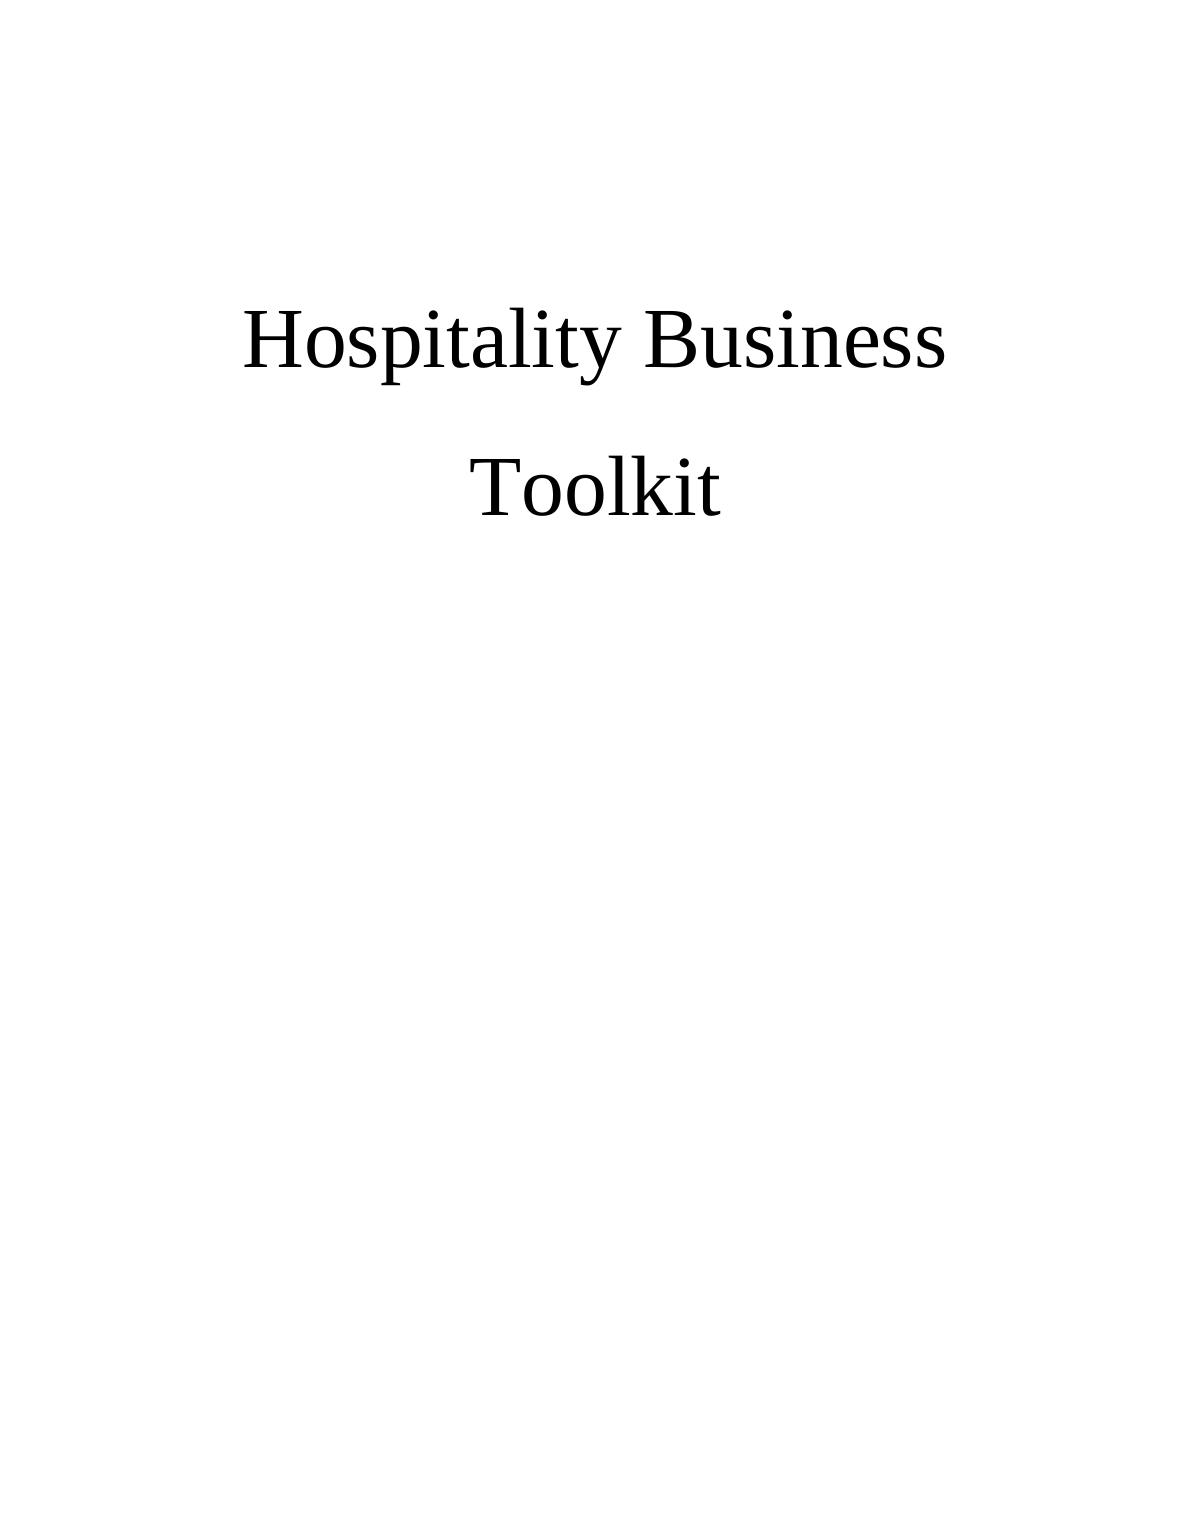 Managing and Monitoring Financial Performance in Hospitality Business Toolkit_1